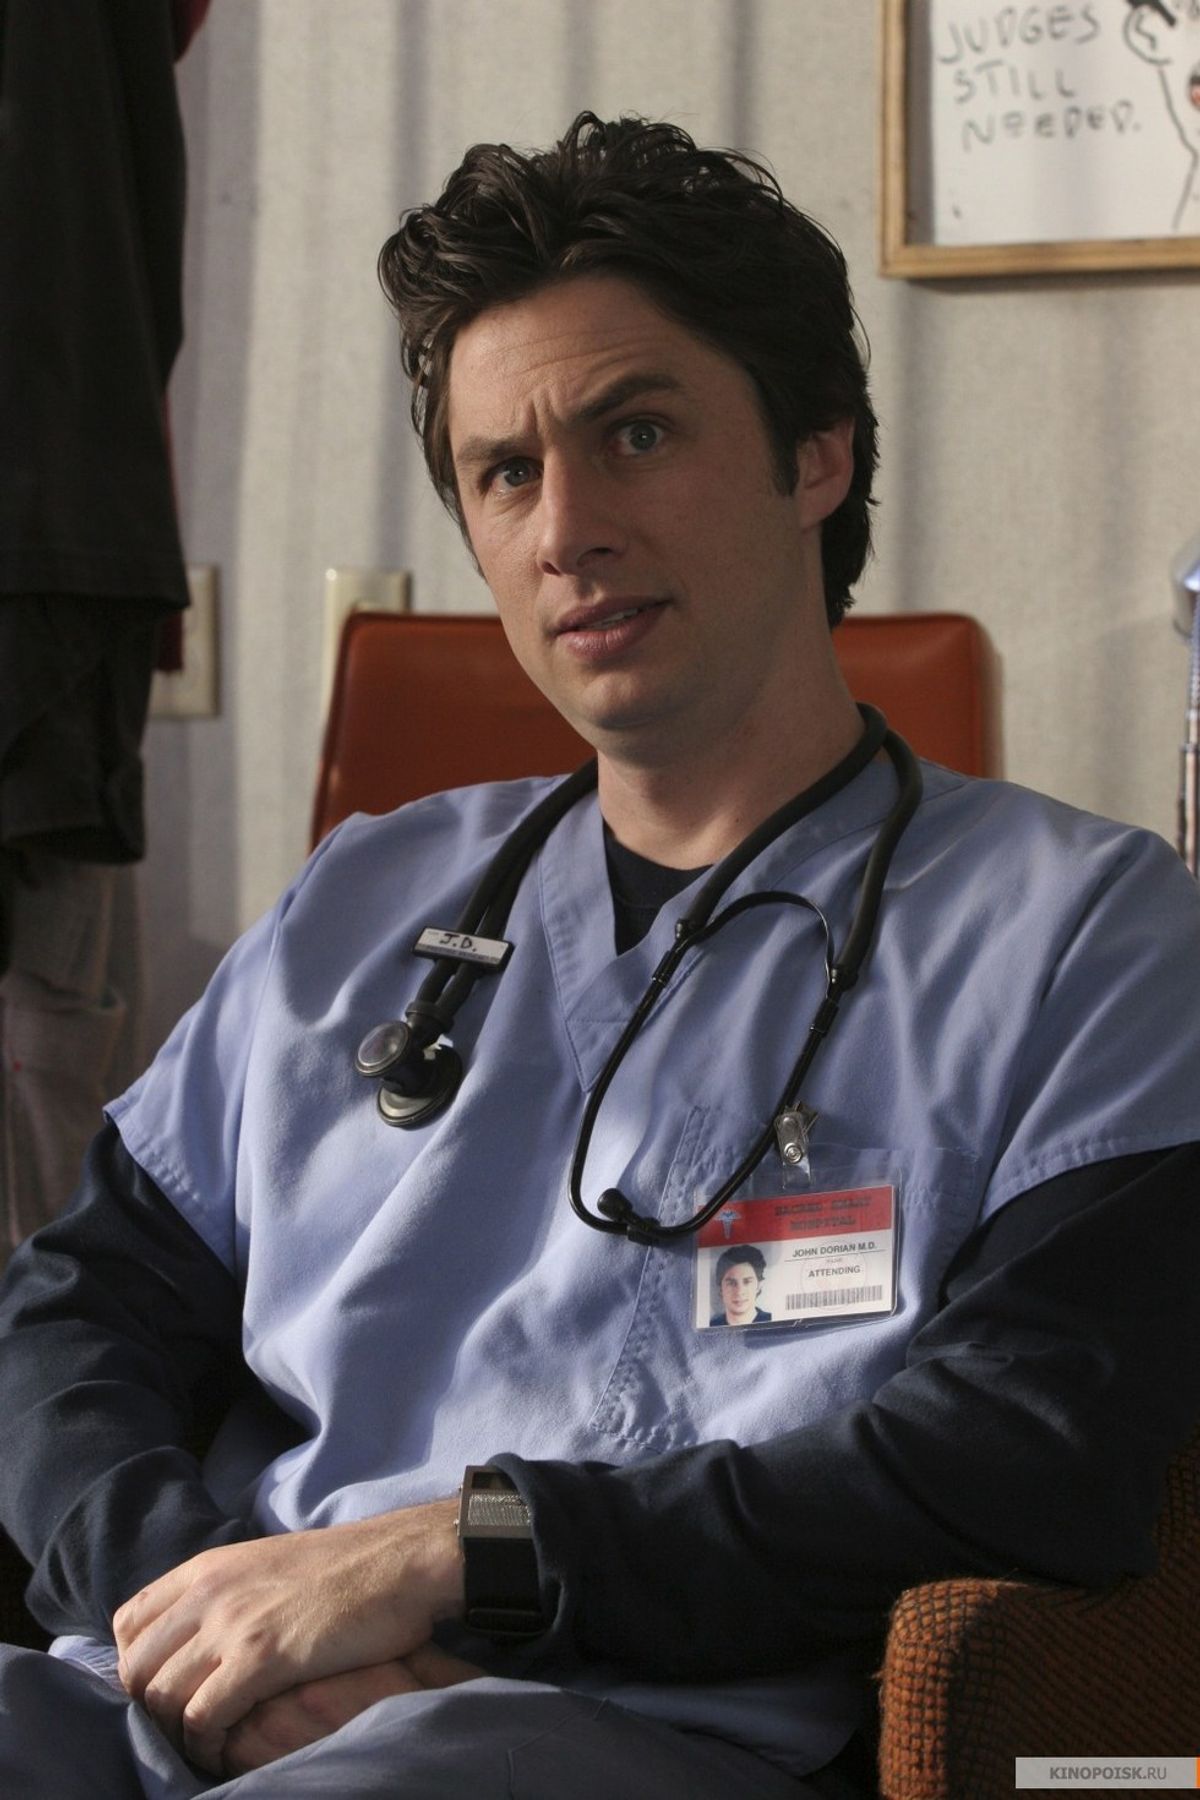 19 Reasons Why Dr. John Dorian from Scrubs Should Be Your Inspiration